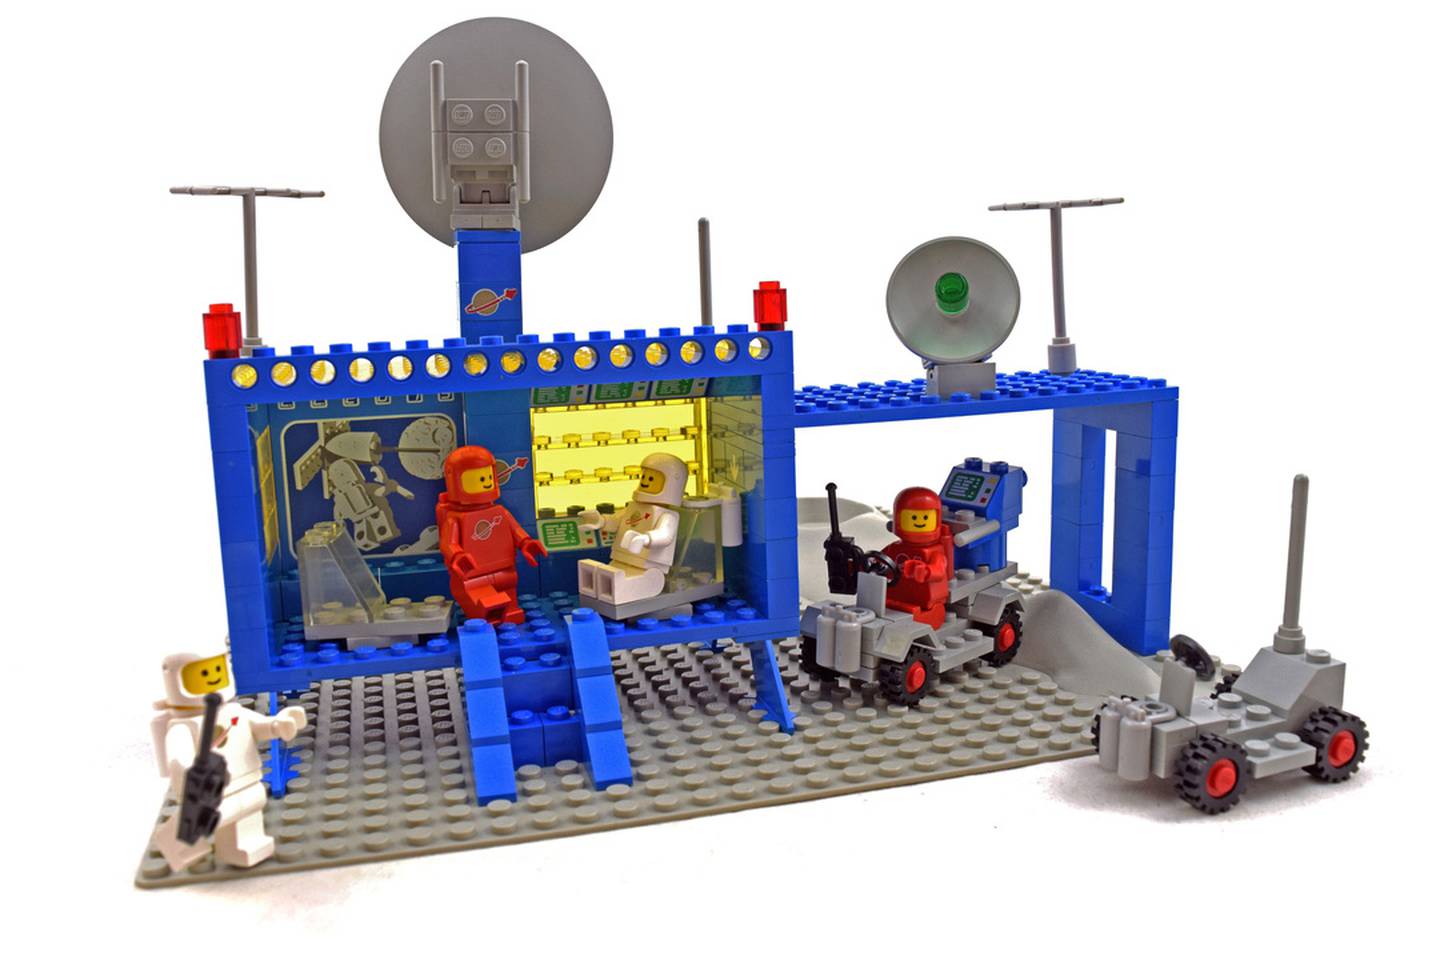 LEGO Command Center was released in 1979.